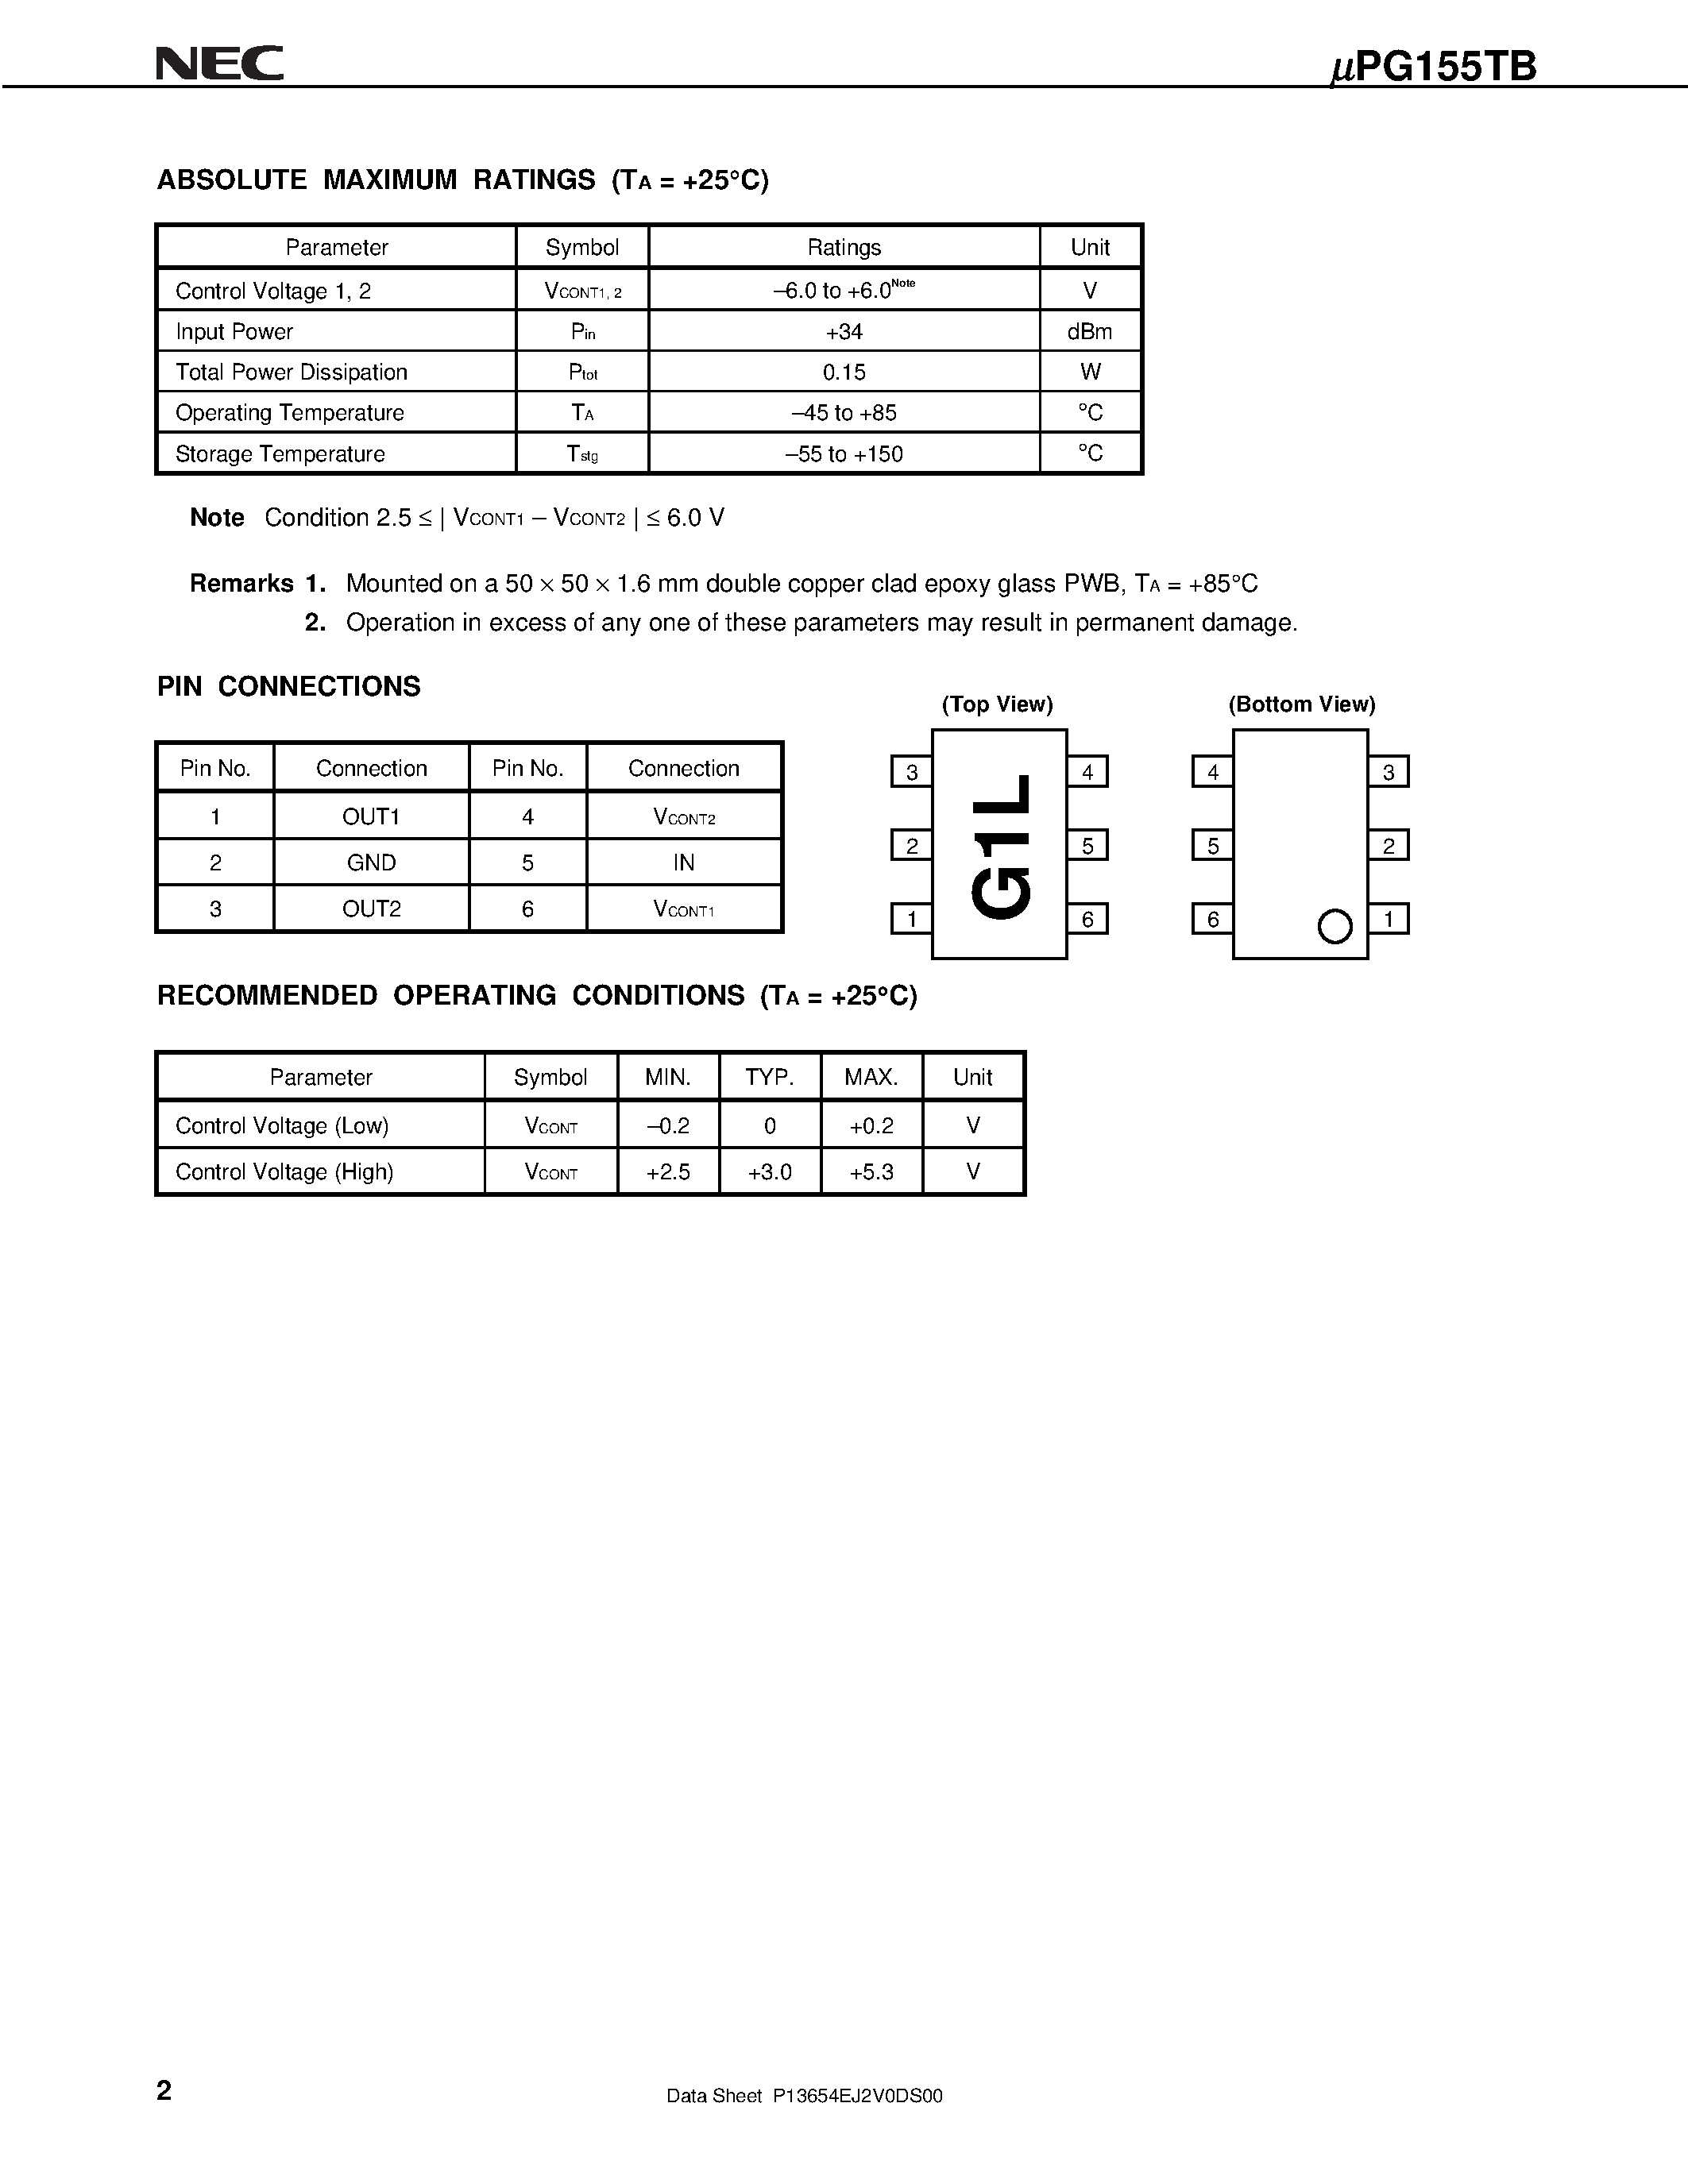 Datasheet UPG155TB-E3 - L-BAND SPDT SWITCH page 2